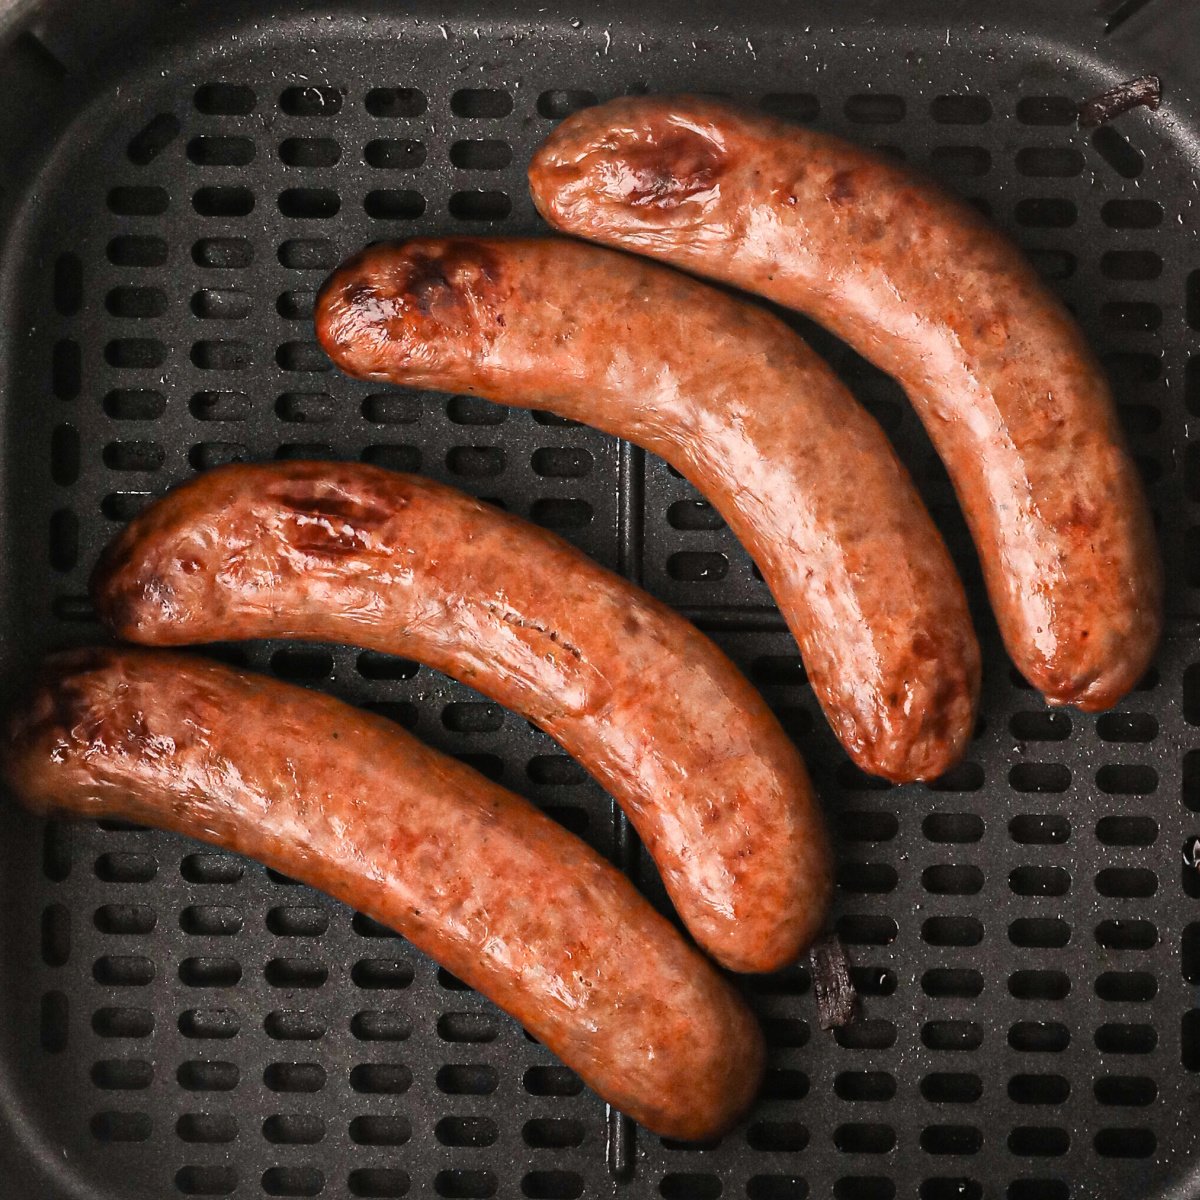 Italian Sausage in air fryer basket ready to eat.